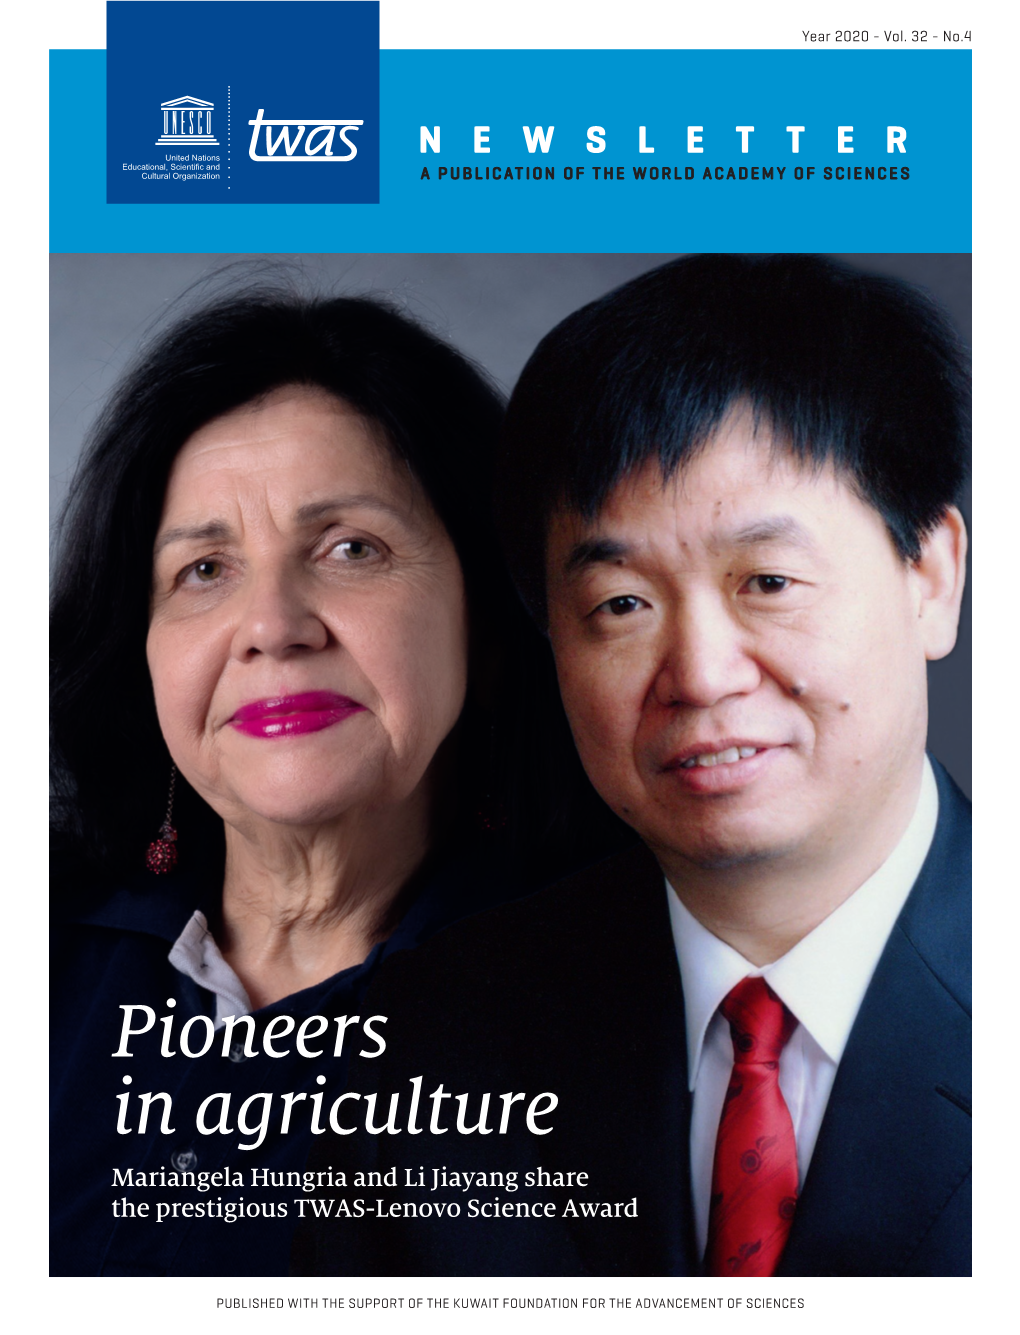 Pioneers in Agriculture Mariangela Hungria and Li Jiayang Share the Prestigious TWAS-Lenovo Science Award